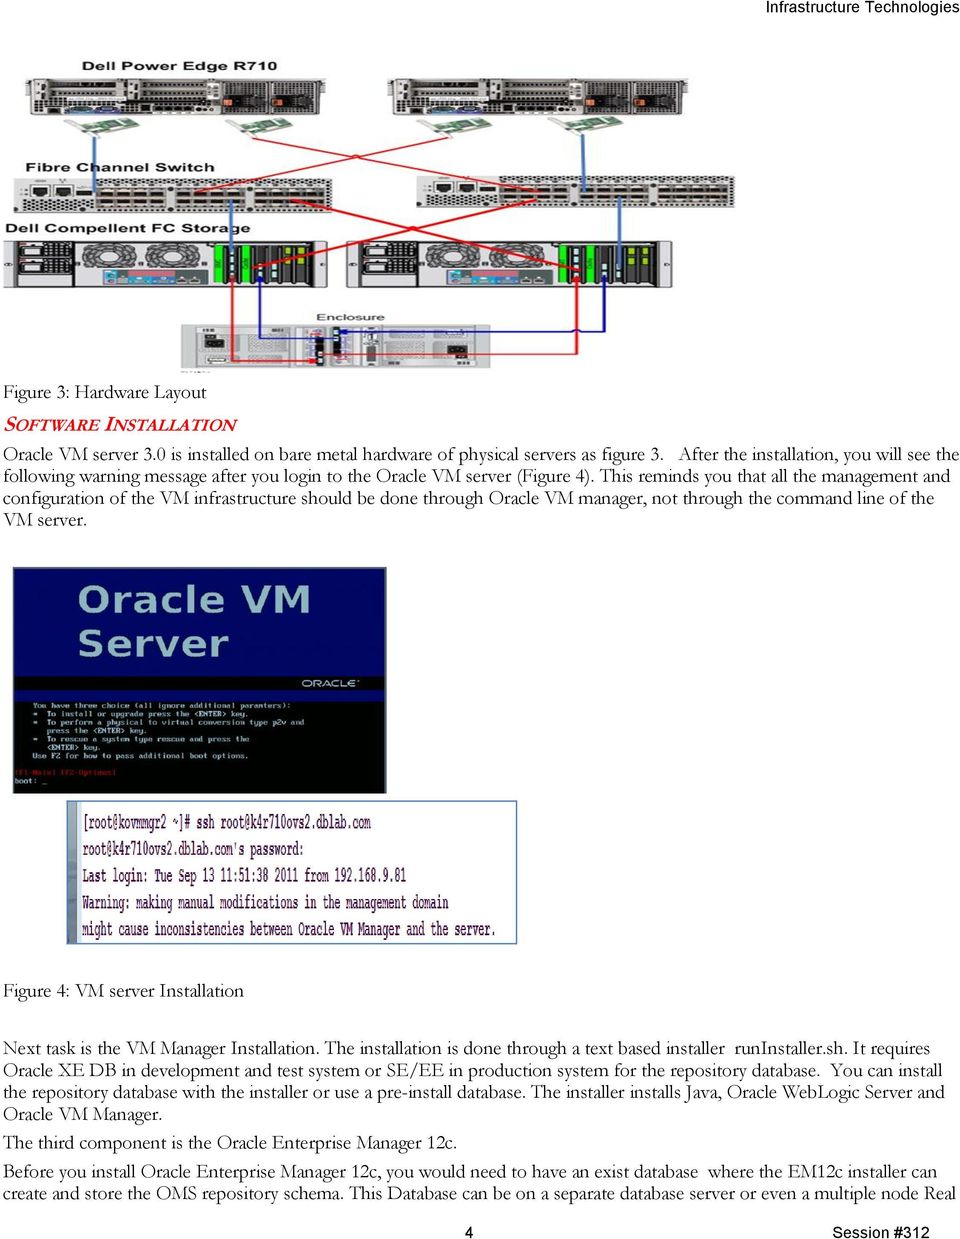 This reminds you that all the management and configuration of the VM infrastructure should be done through Oracle VM manager, not through the command line of the VM server.